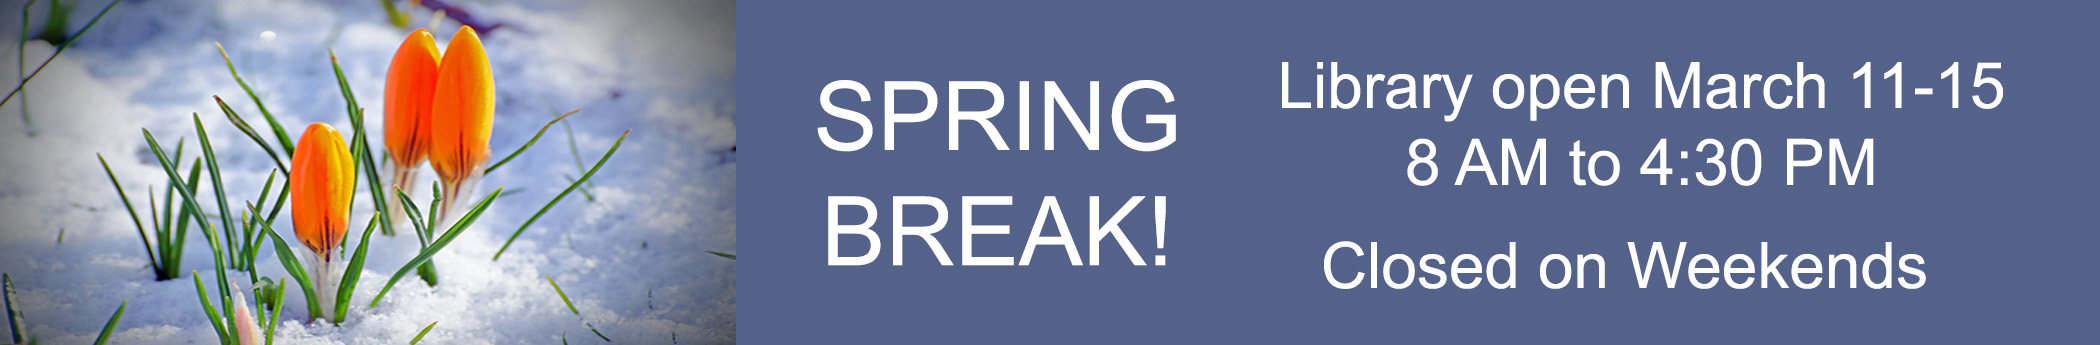 spring break library open march 11-15 8am to 4:30pm closed weekends